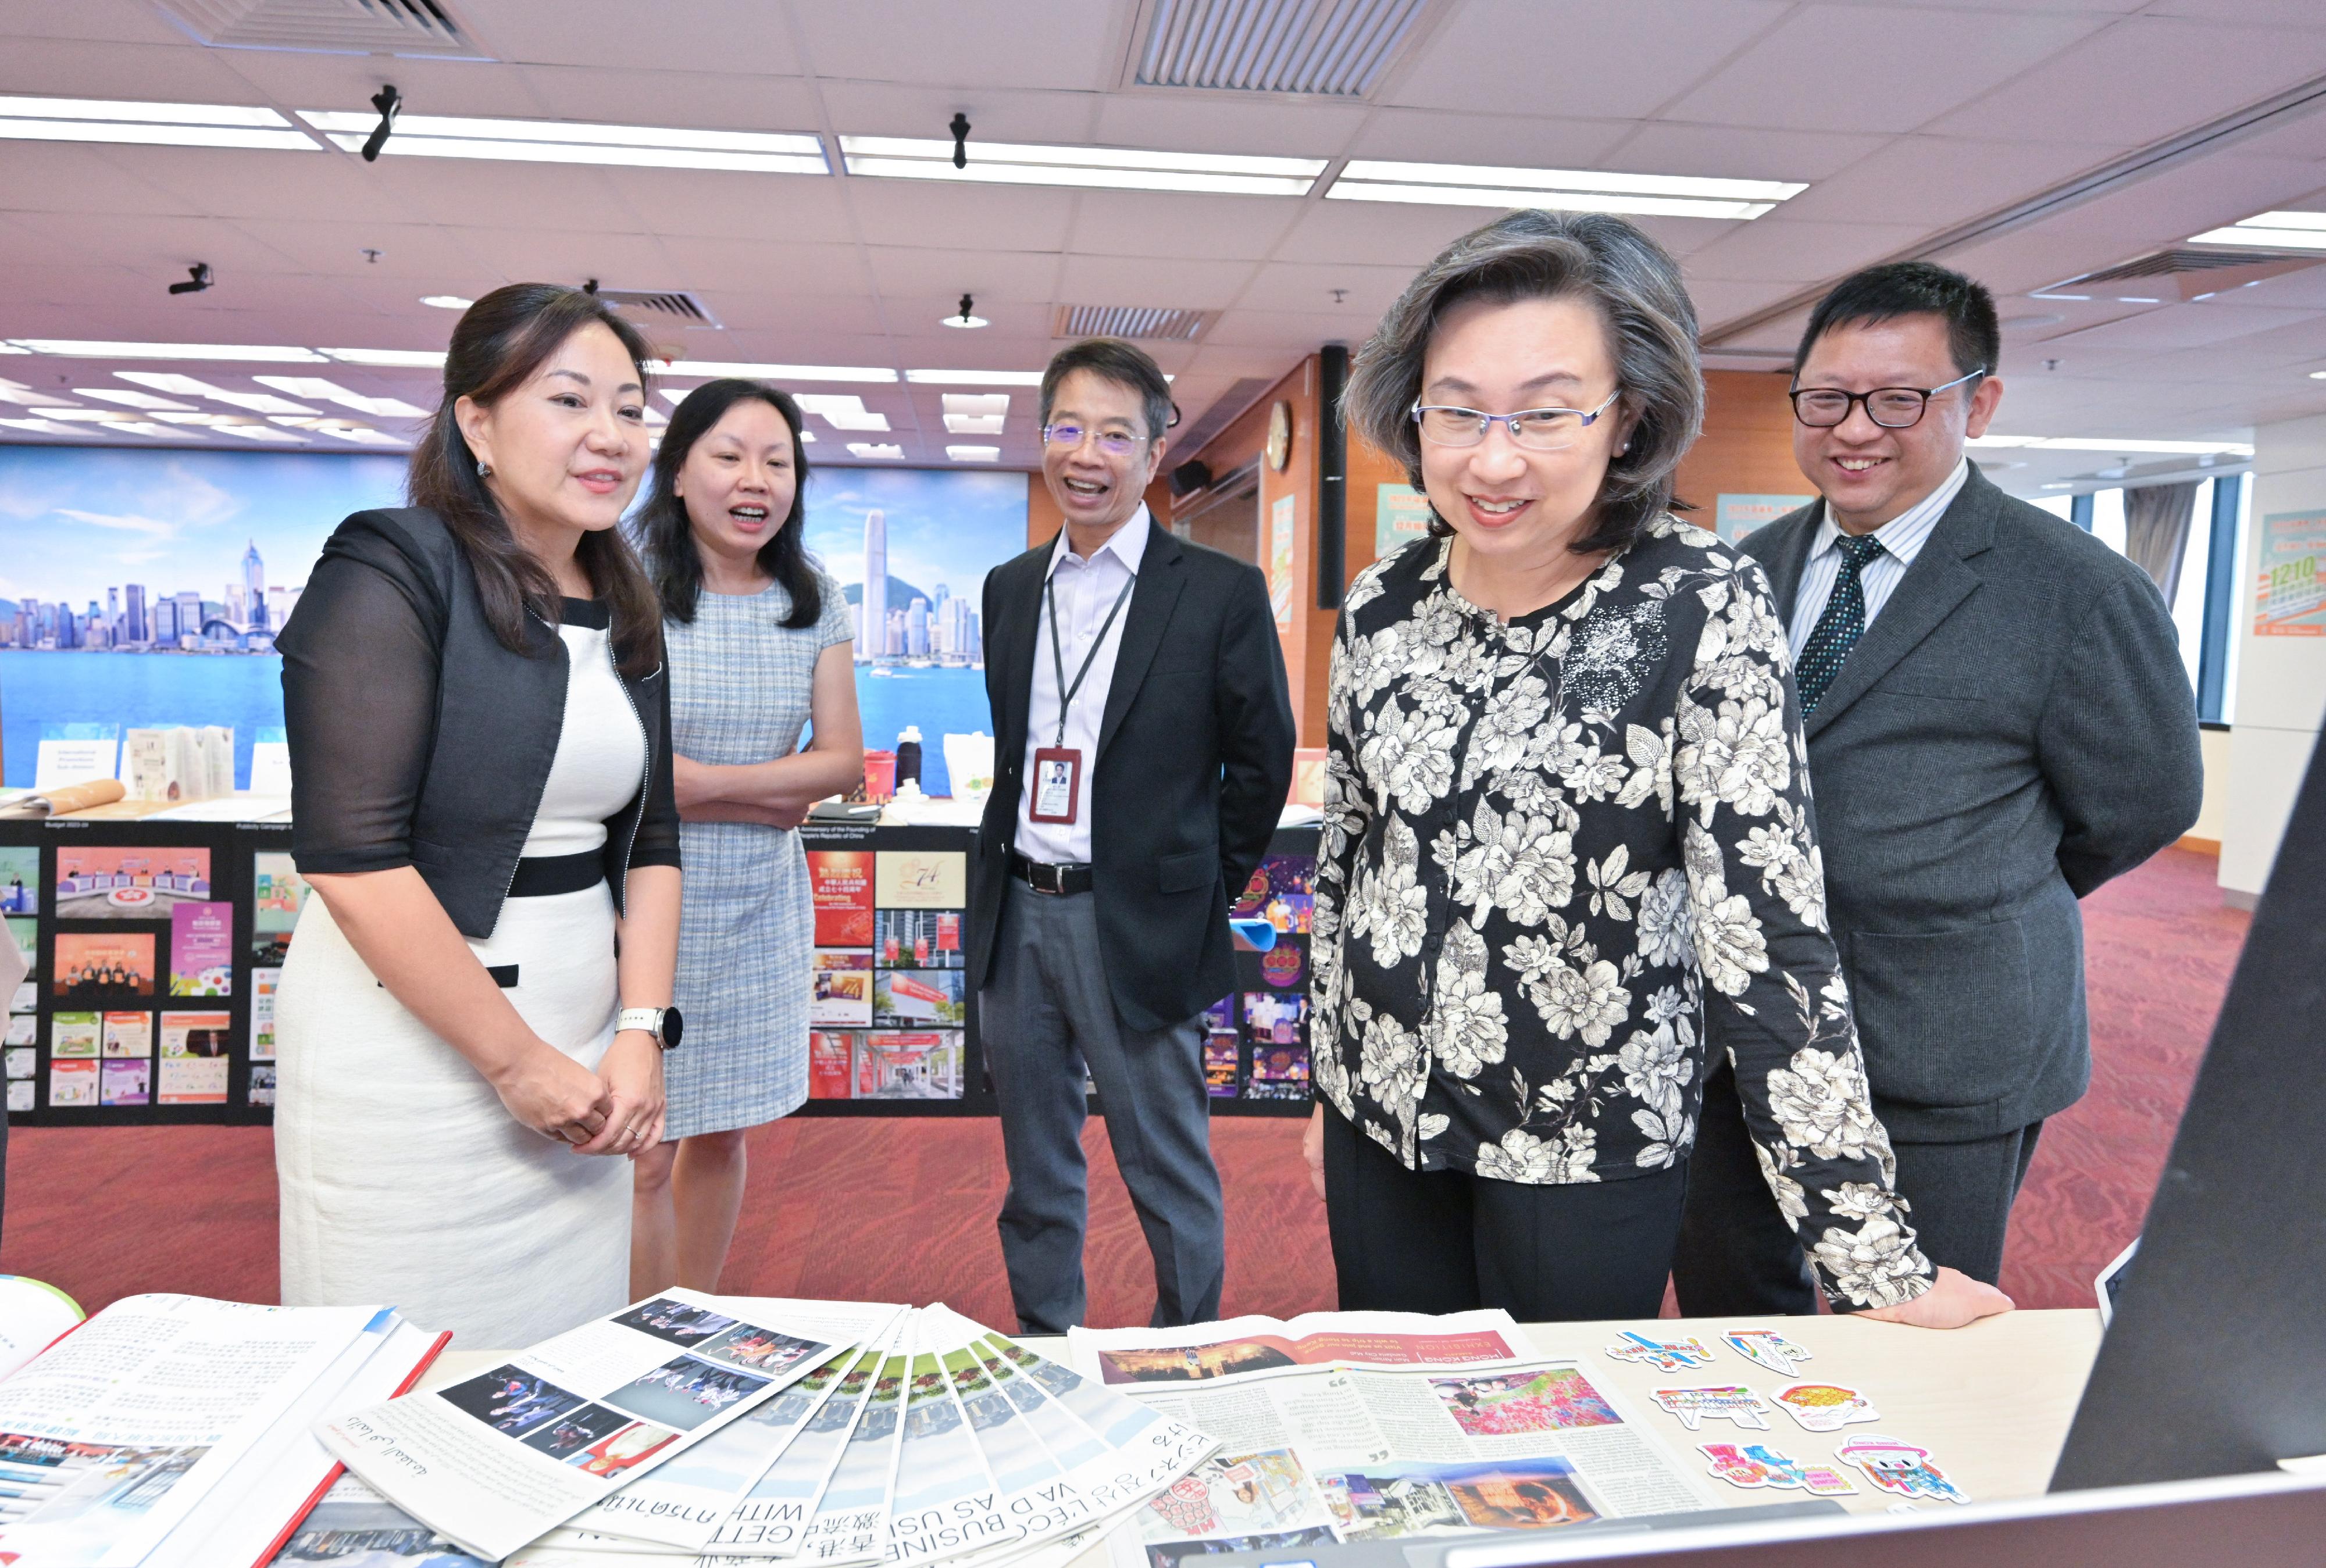 The Secretary for the Civil Service, Mrs Ingrid Yeung, visited the Information Services Department today (November 6). Photo shows Mrs Yeung (second right) being briefed on the department's latest effort in public relations and promotions locally and outside Hong Kong while conversing with staff from the Overseas Public Relations Sub-division. Looking on are the Permanent Secretary for the Civil Service, Mr Clement Leung (centre); the Director of Information Services, Mr Fletch Chan (first right); and Deputy Director of Information Services Ms Grace Ng (second left).